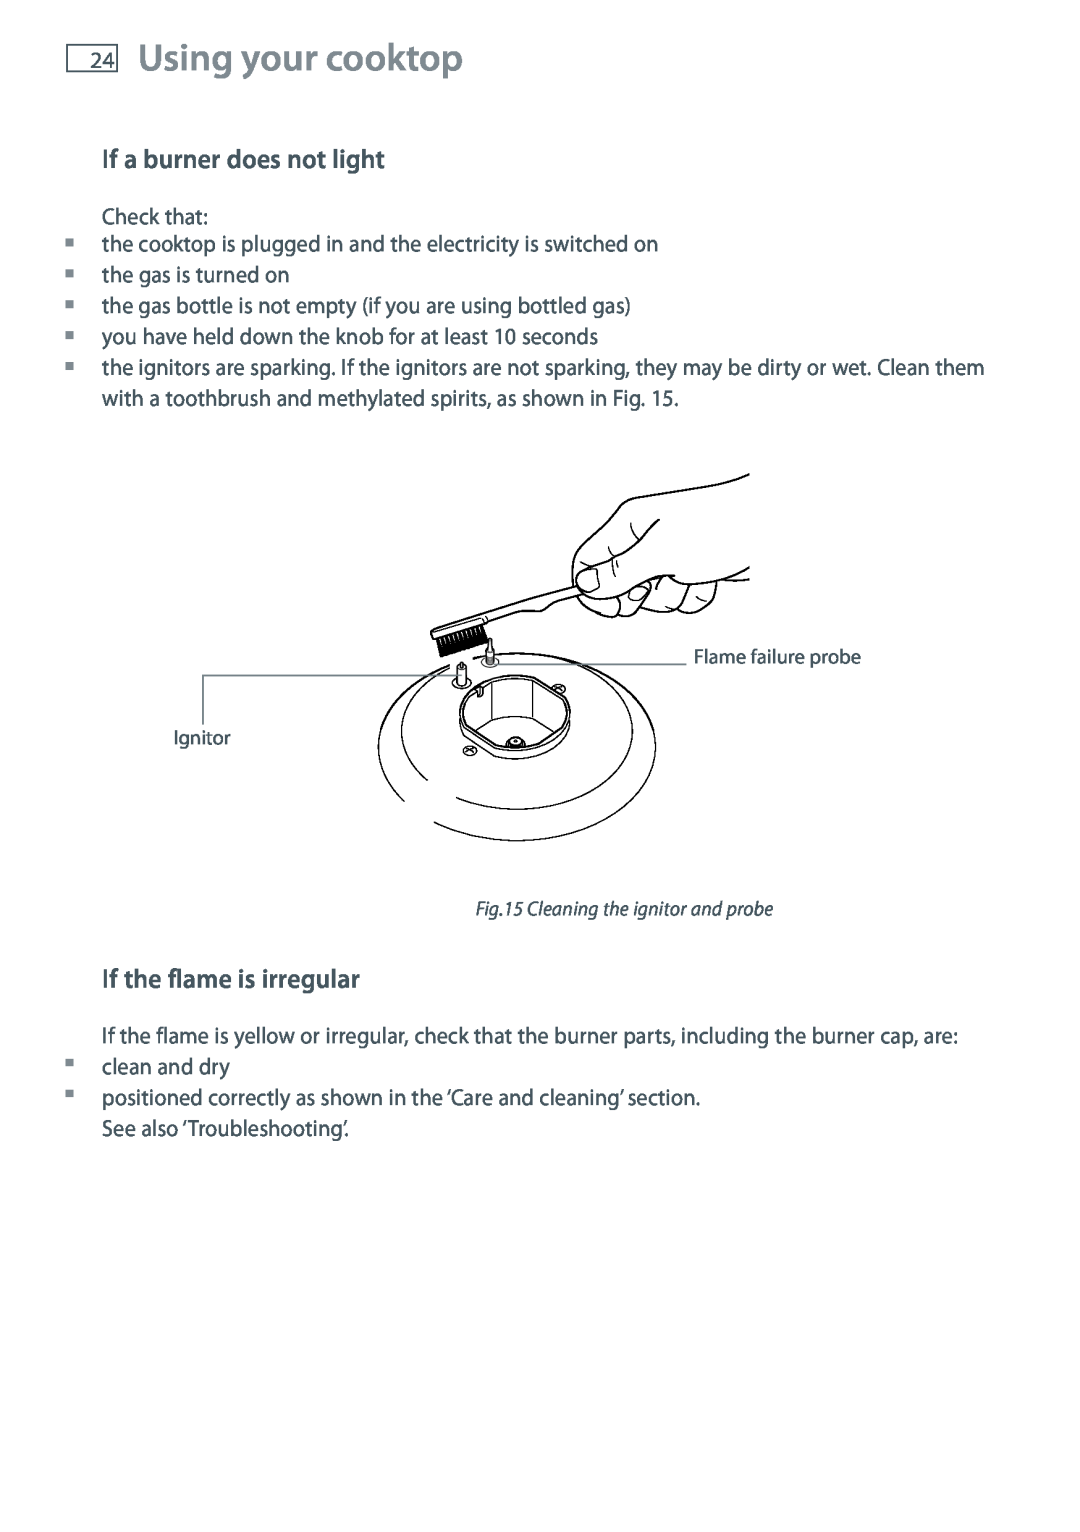 Fisher & Paykel CG705 installation instructions If a burner does not light, If the flame is irregular, Using your cooktop 